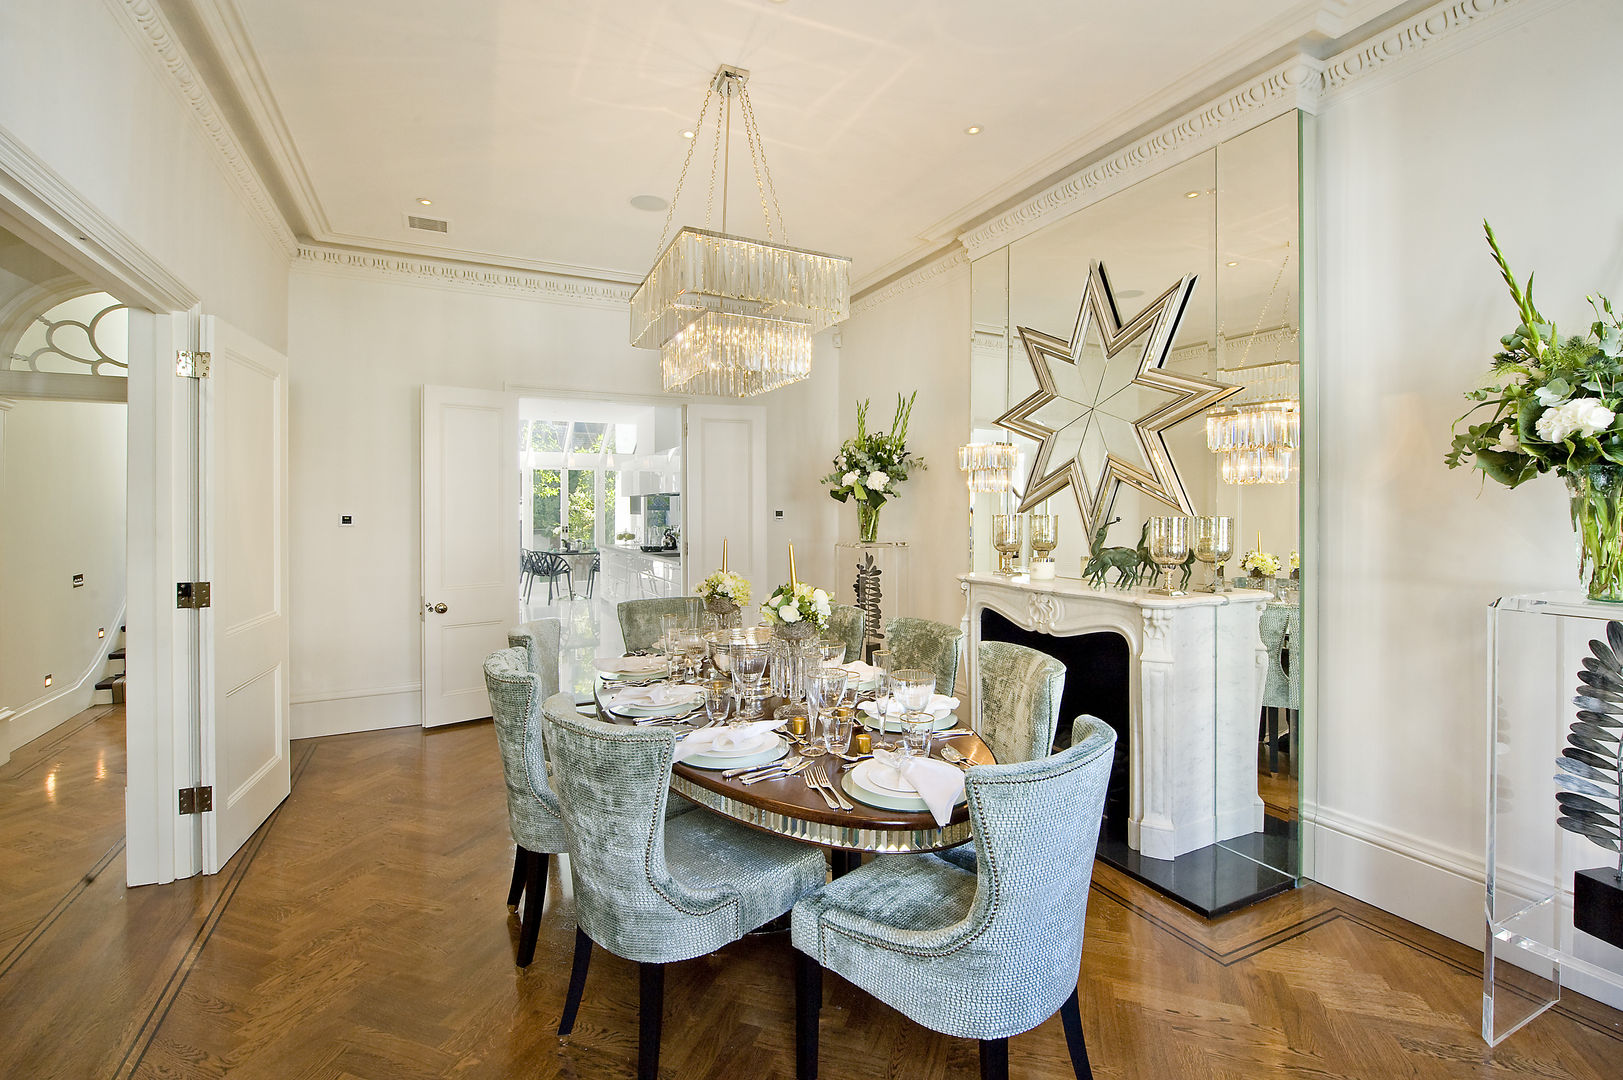 Dining room at the Chester Street House Nash Baker Architects Ltd Classic style dining room